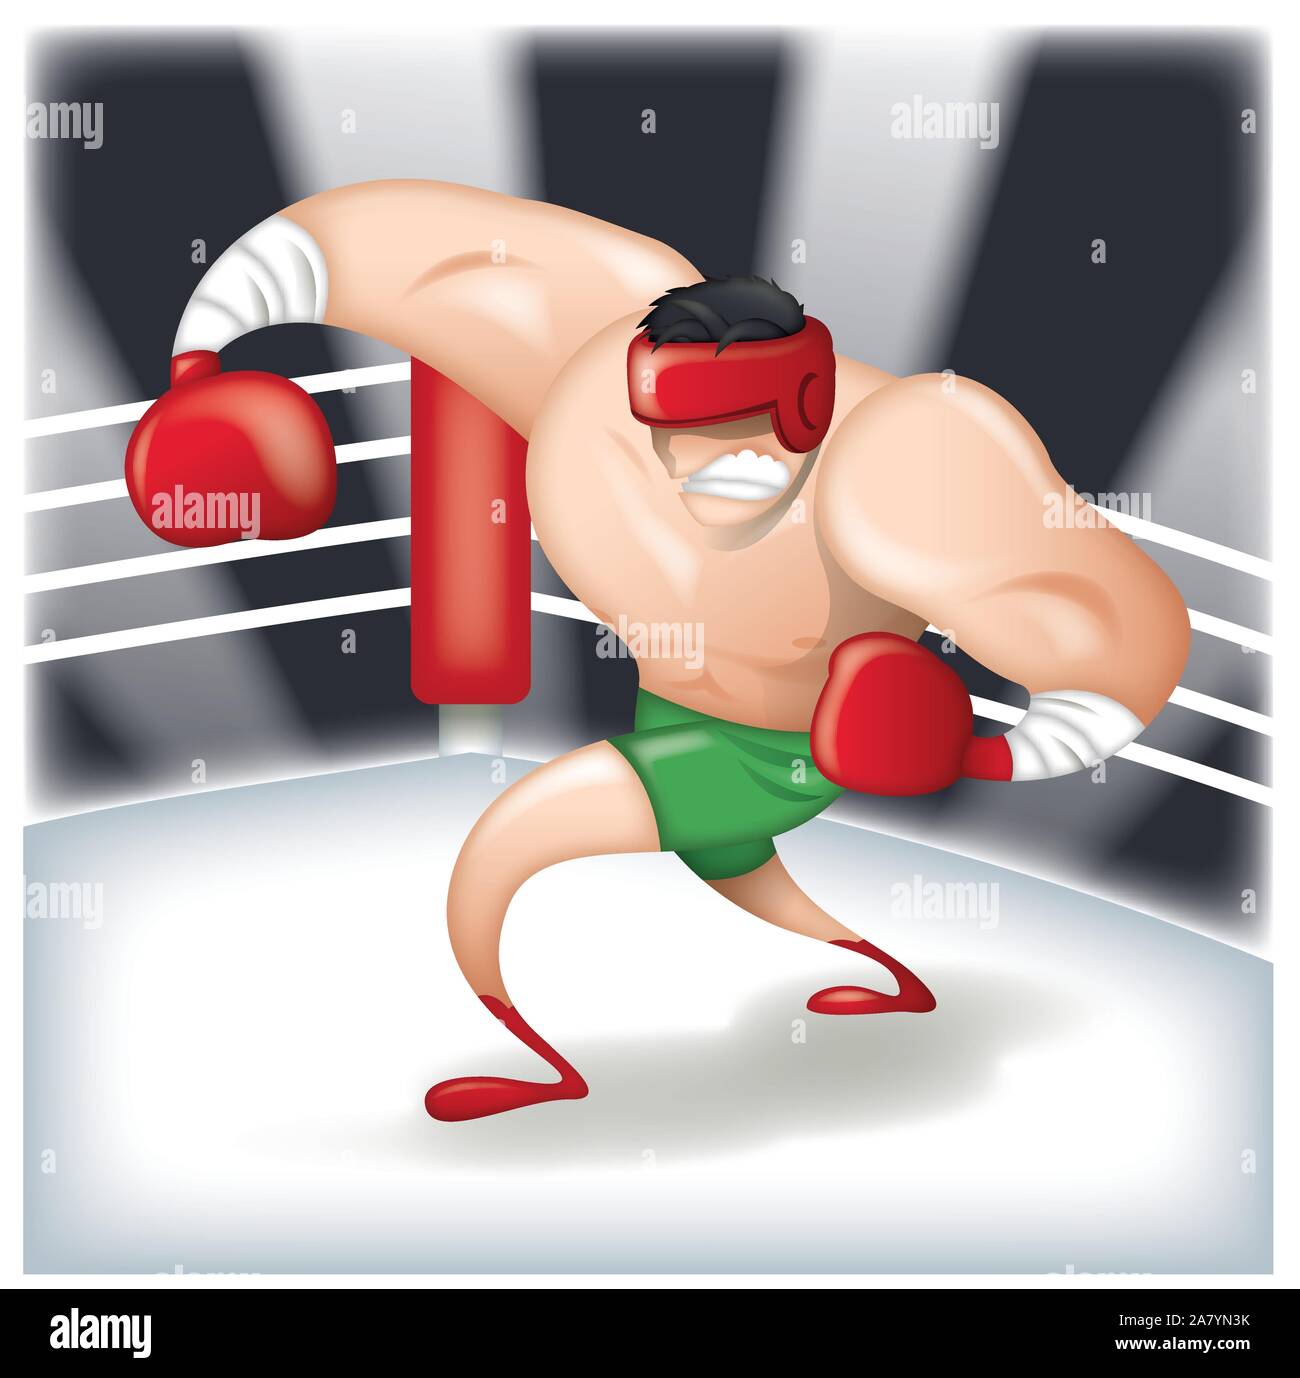 Cartoon character boxer in boxing ring Stock Vector